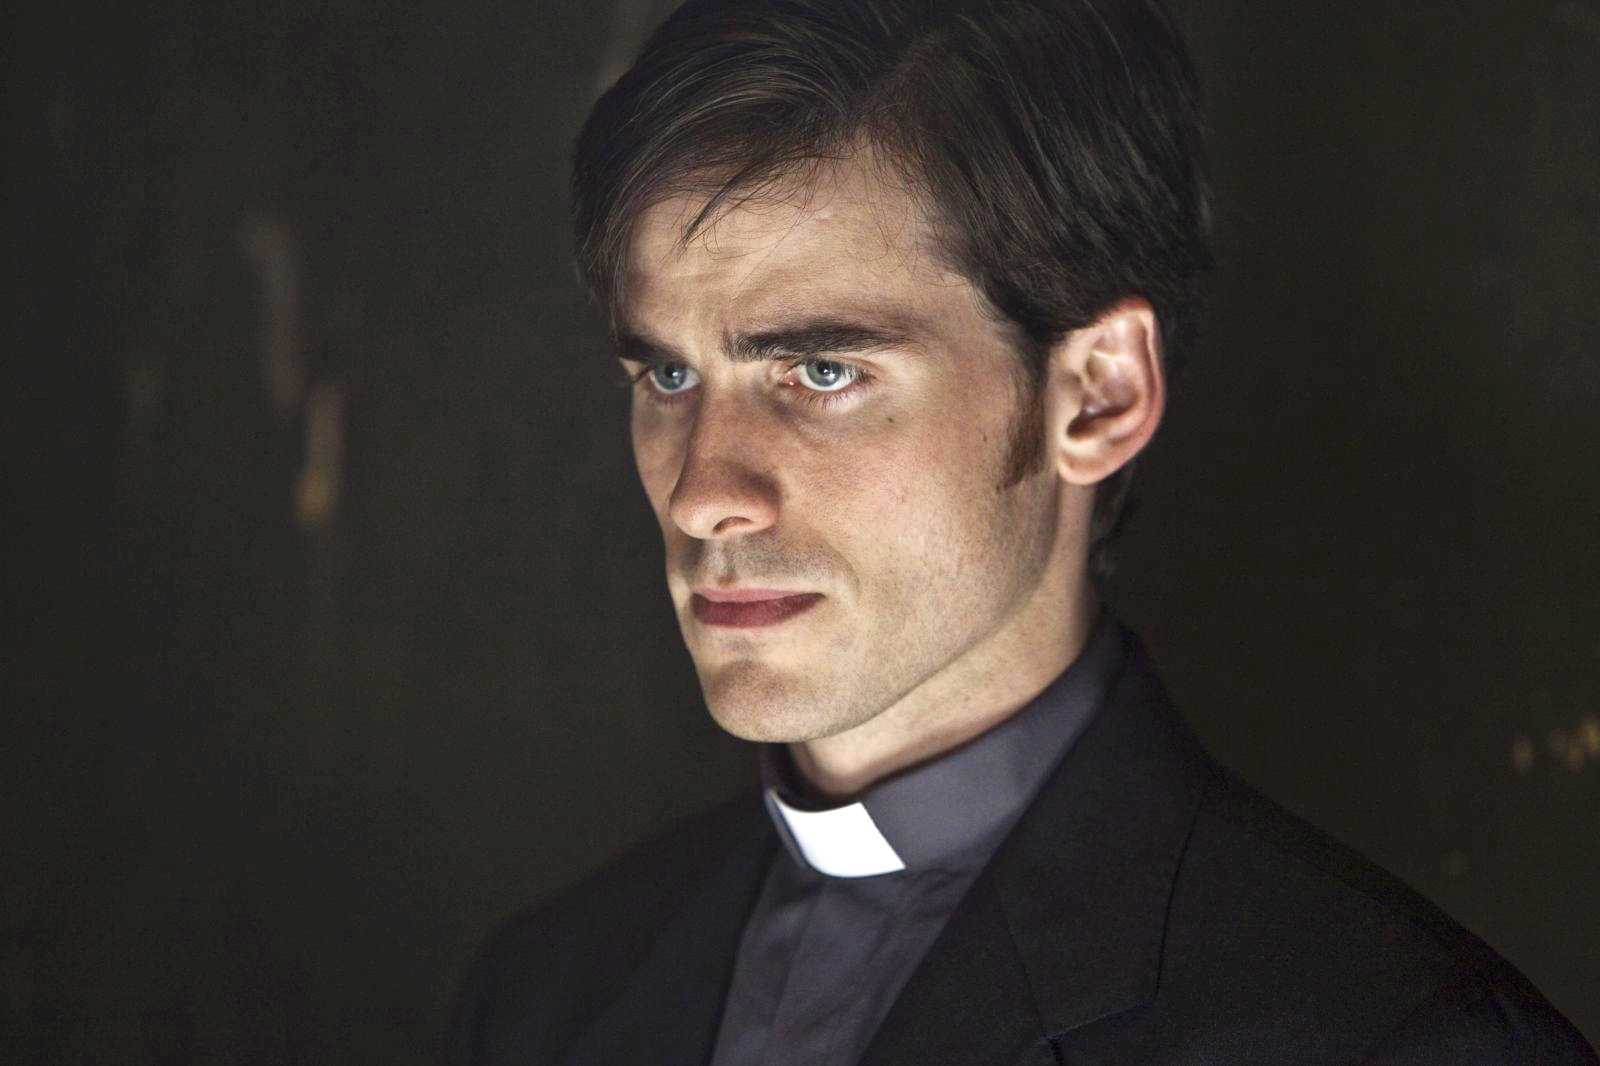 Colin O'Donoghue stars as Michael Kovak in Warner Bros. Pictures' The Rite (2011). Photo credit by Egon Endrenyi.